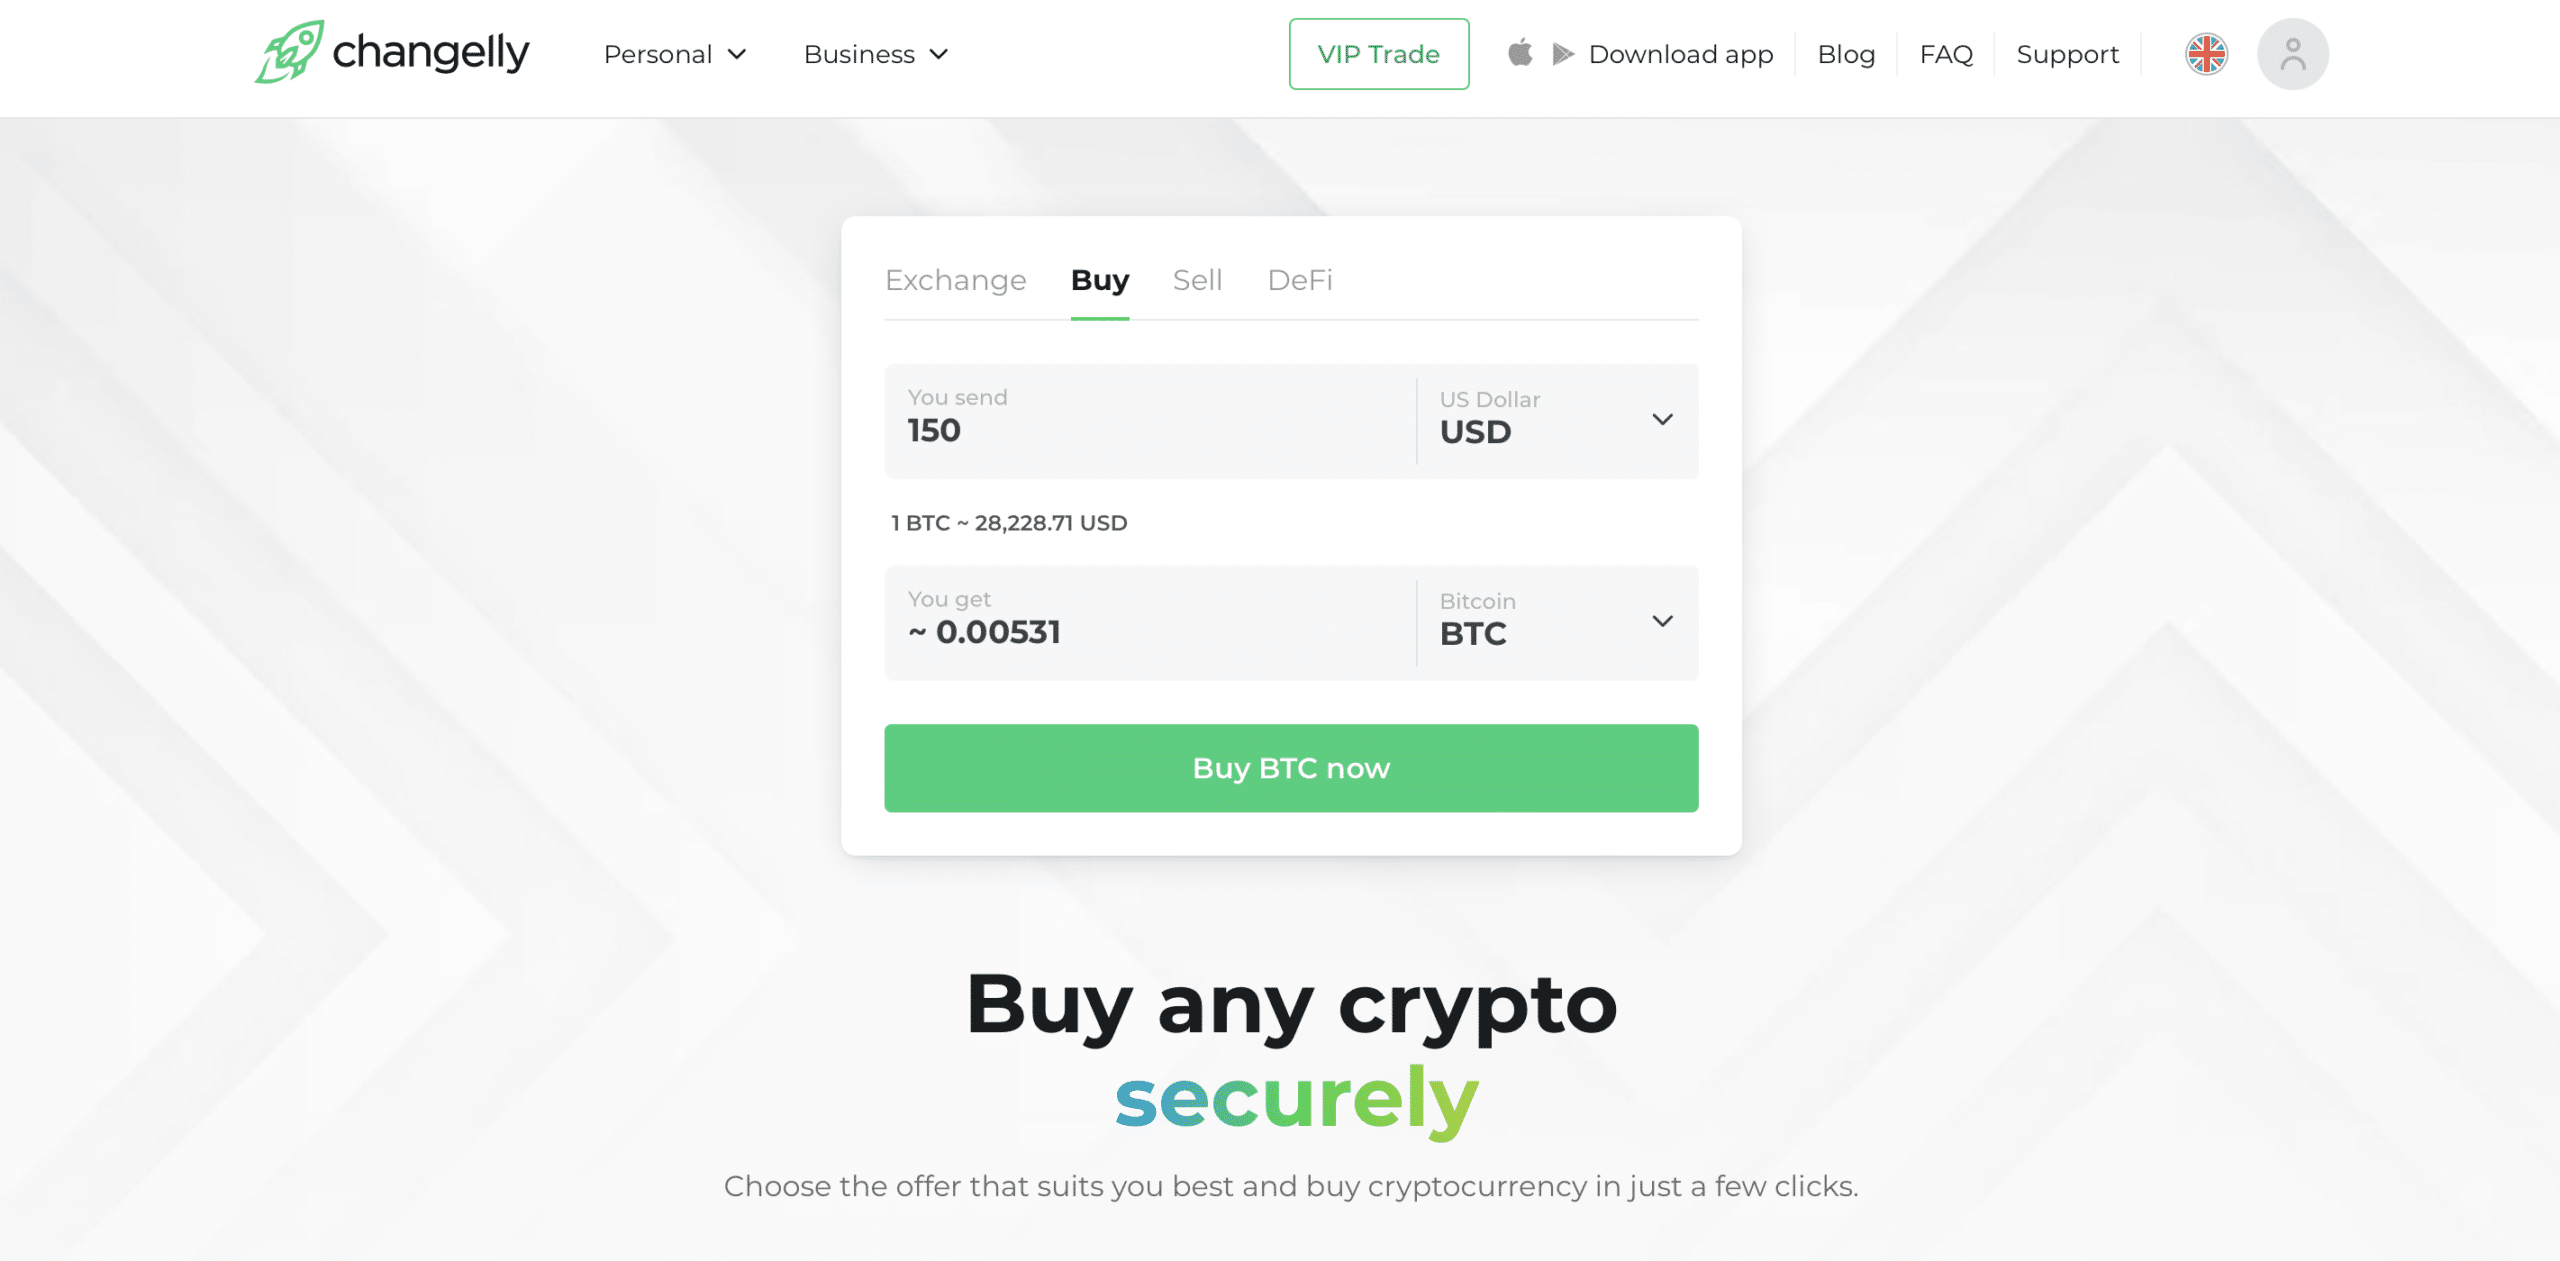 Secure No KYC Crypto Exchange: Privacy and Efficiency